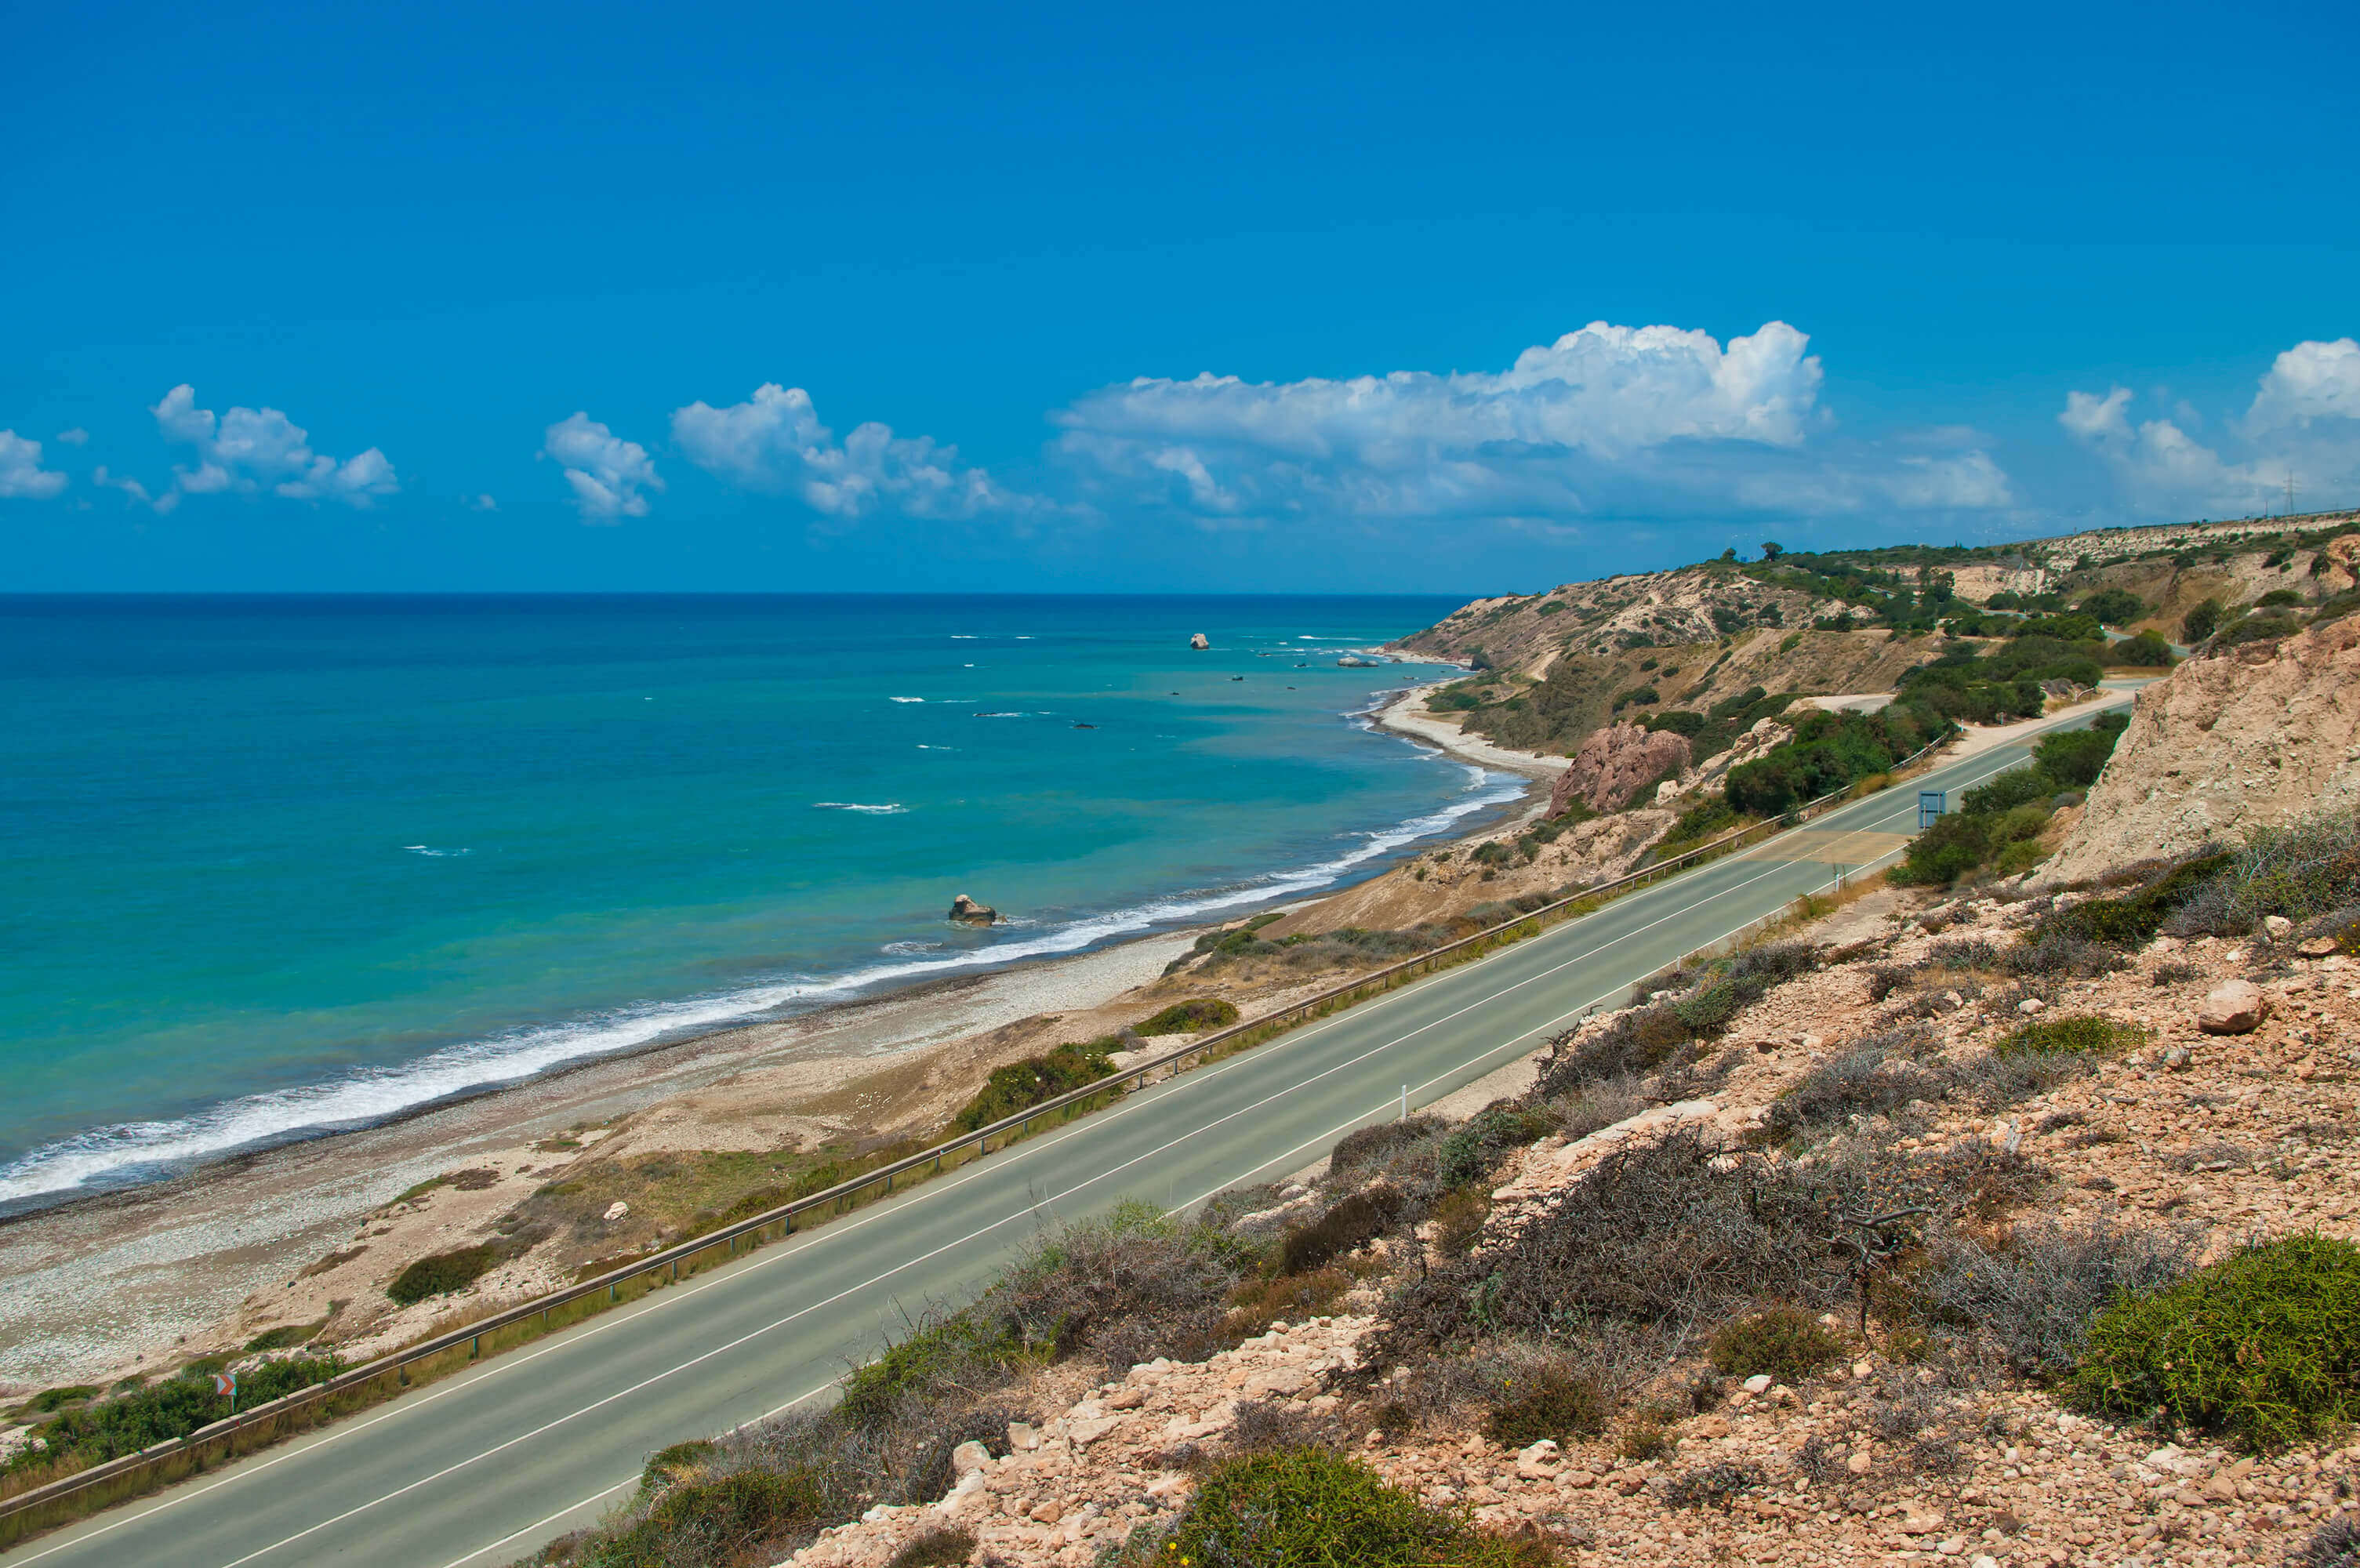 Indulge in beautiful view on your way to the Karpaz